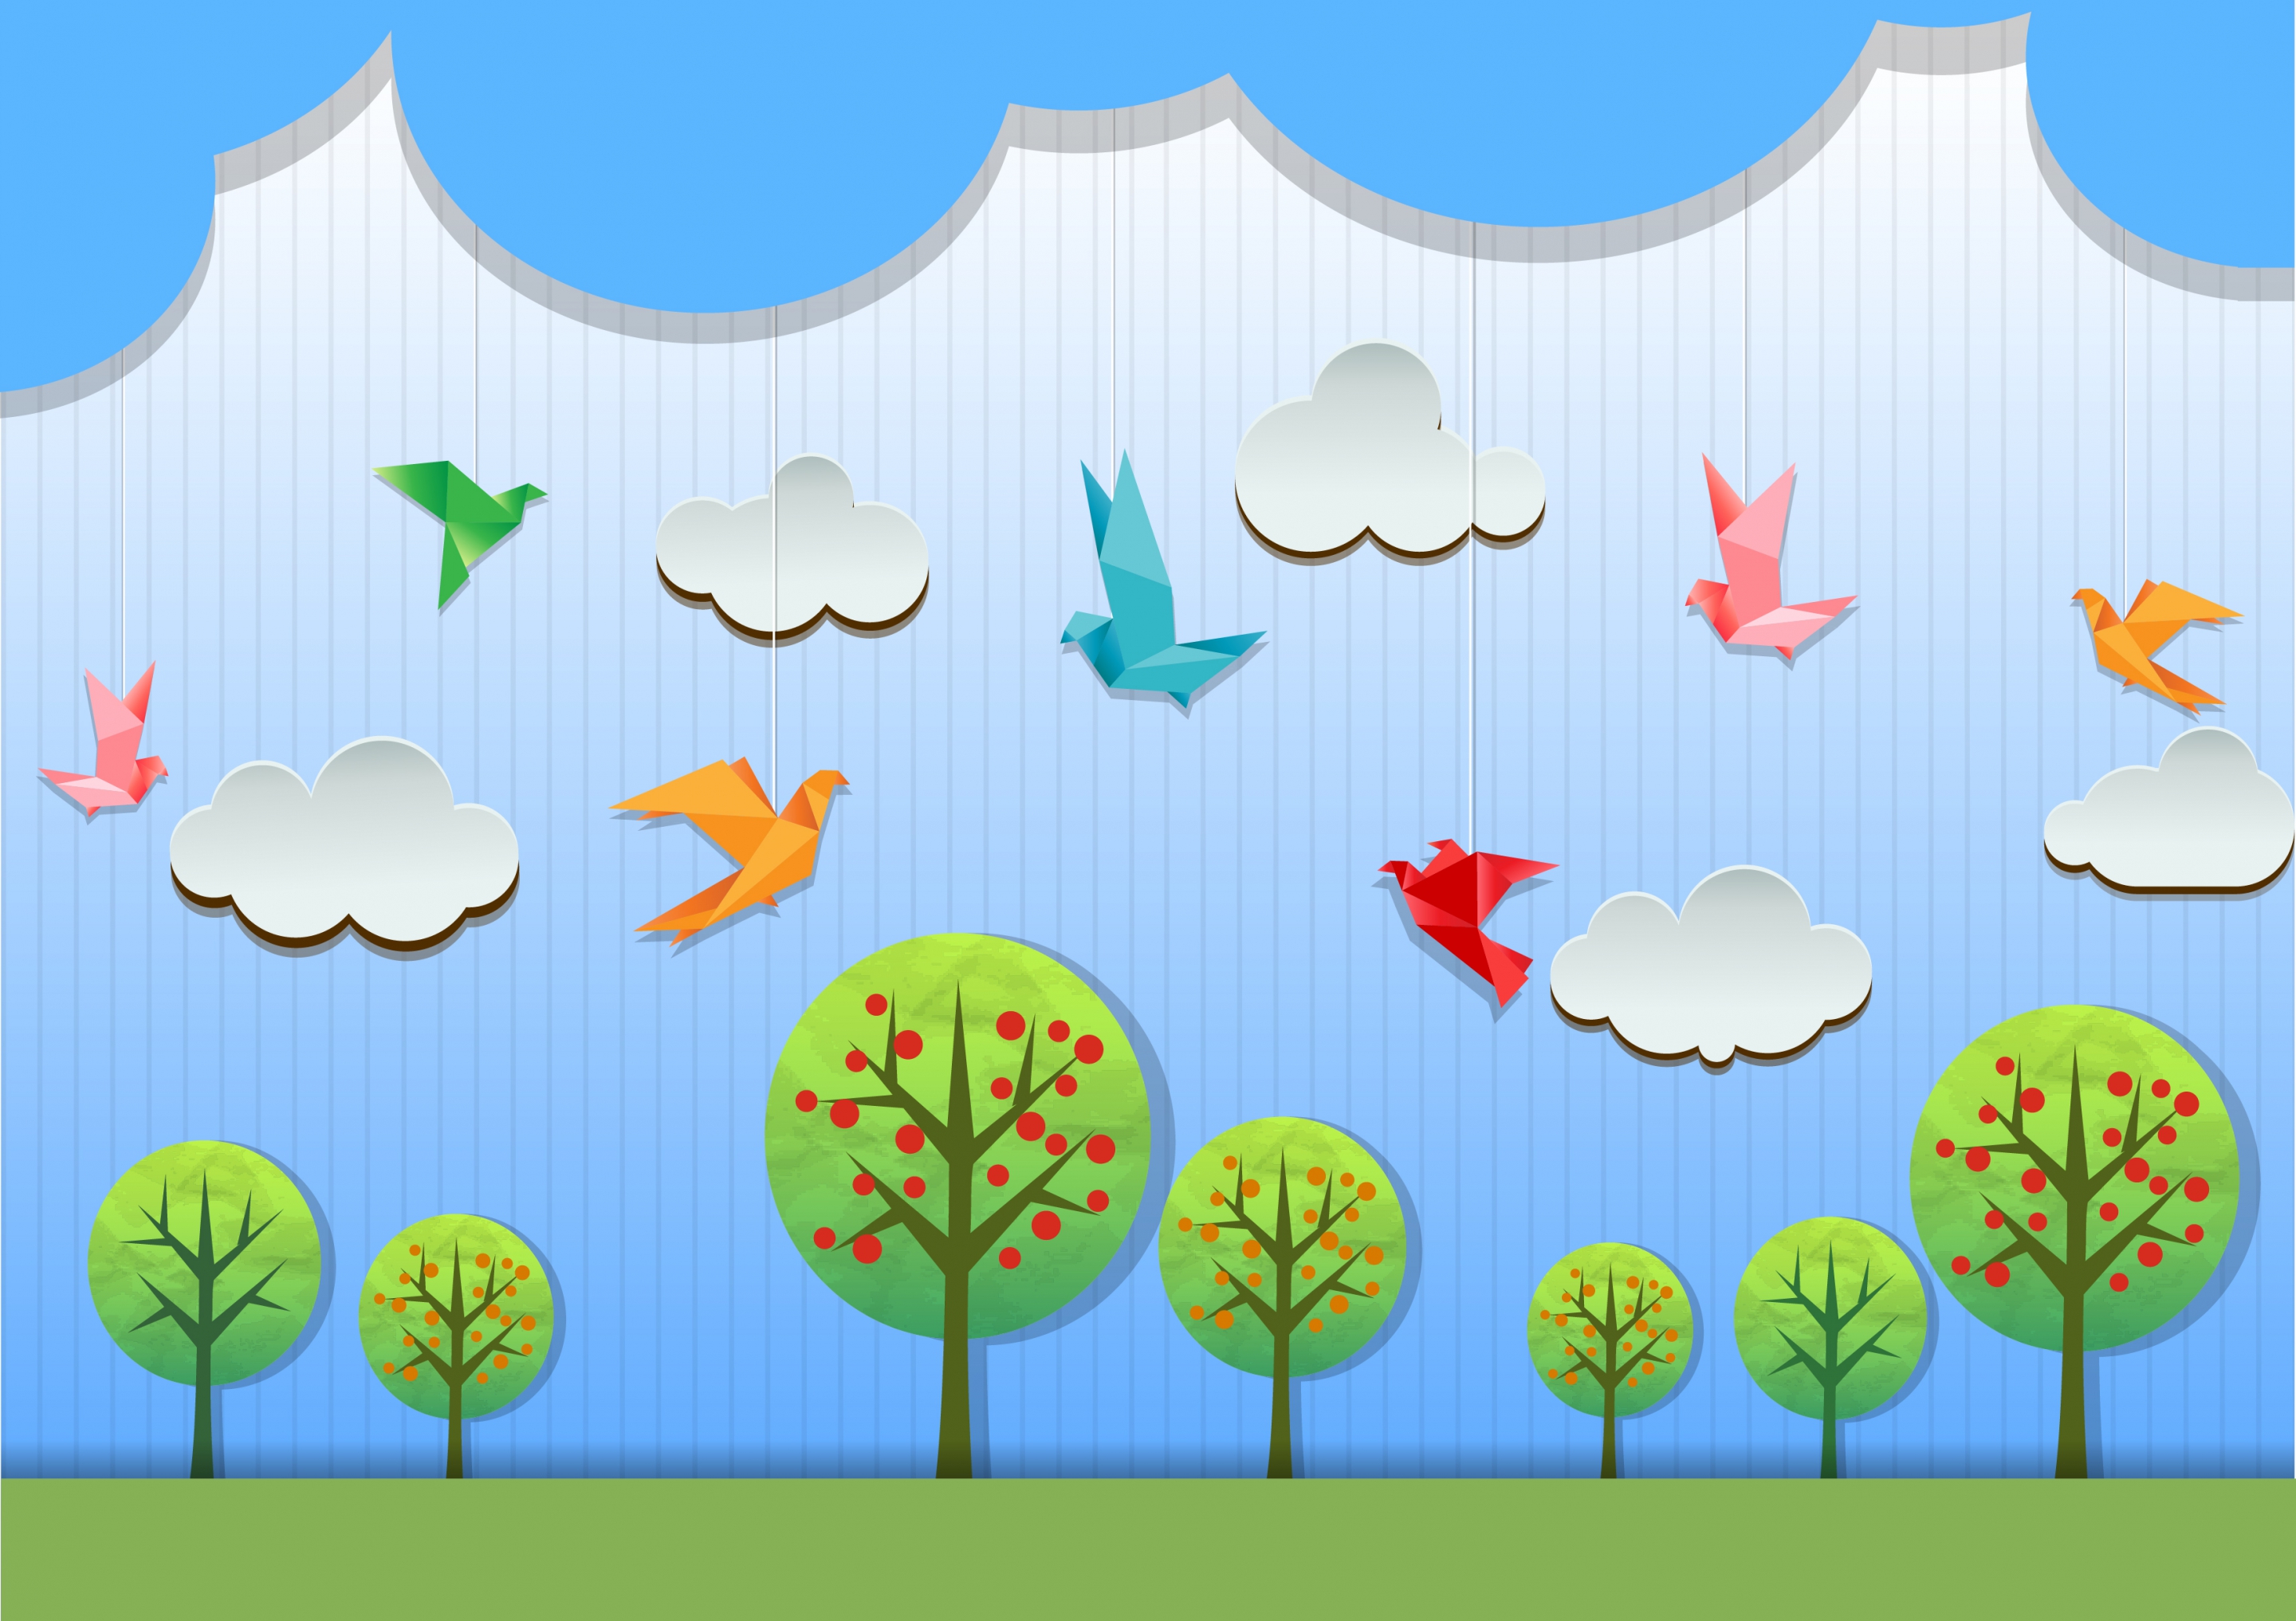 Papercraft Image of Trees, Birds and Clouds